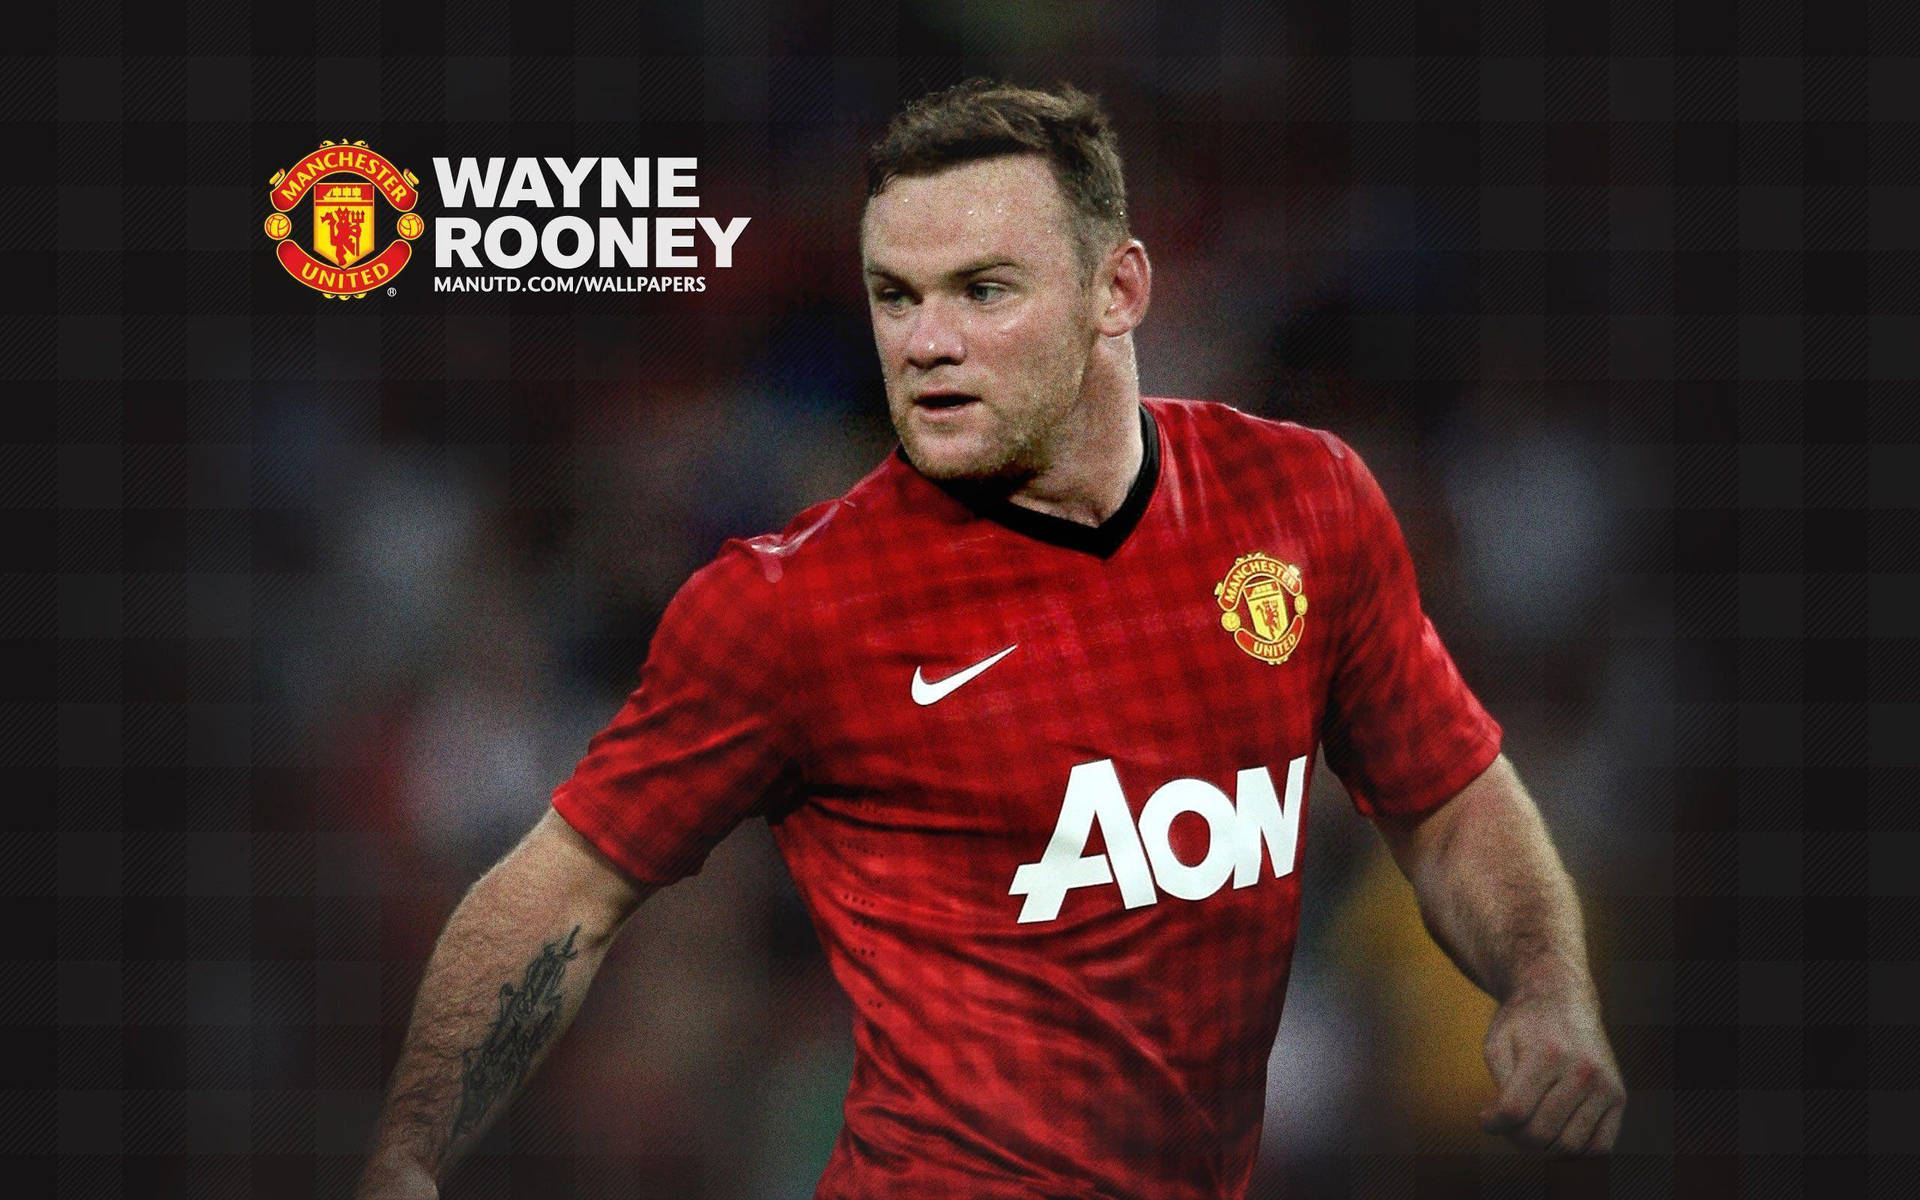 Manchester United Players: Wayne Rooney